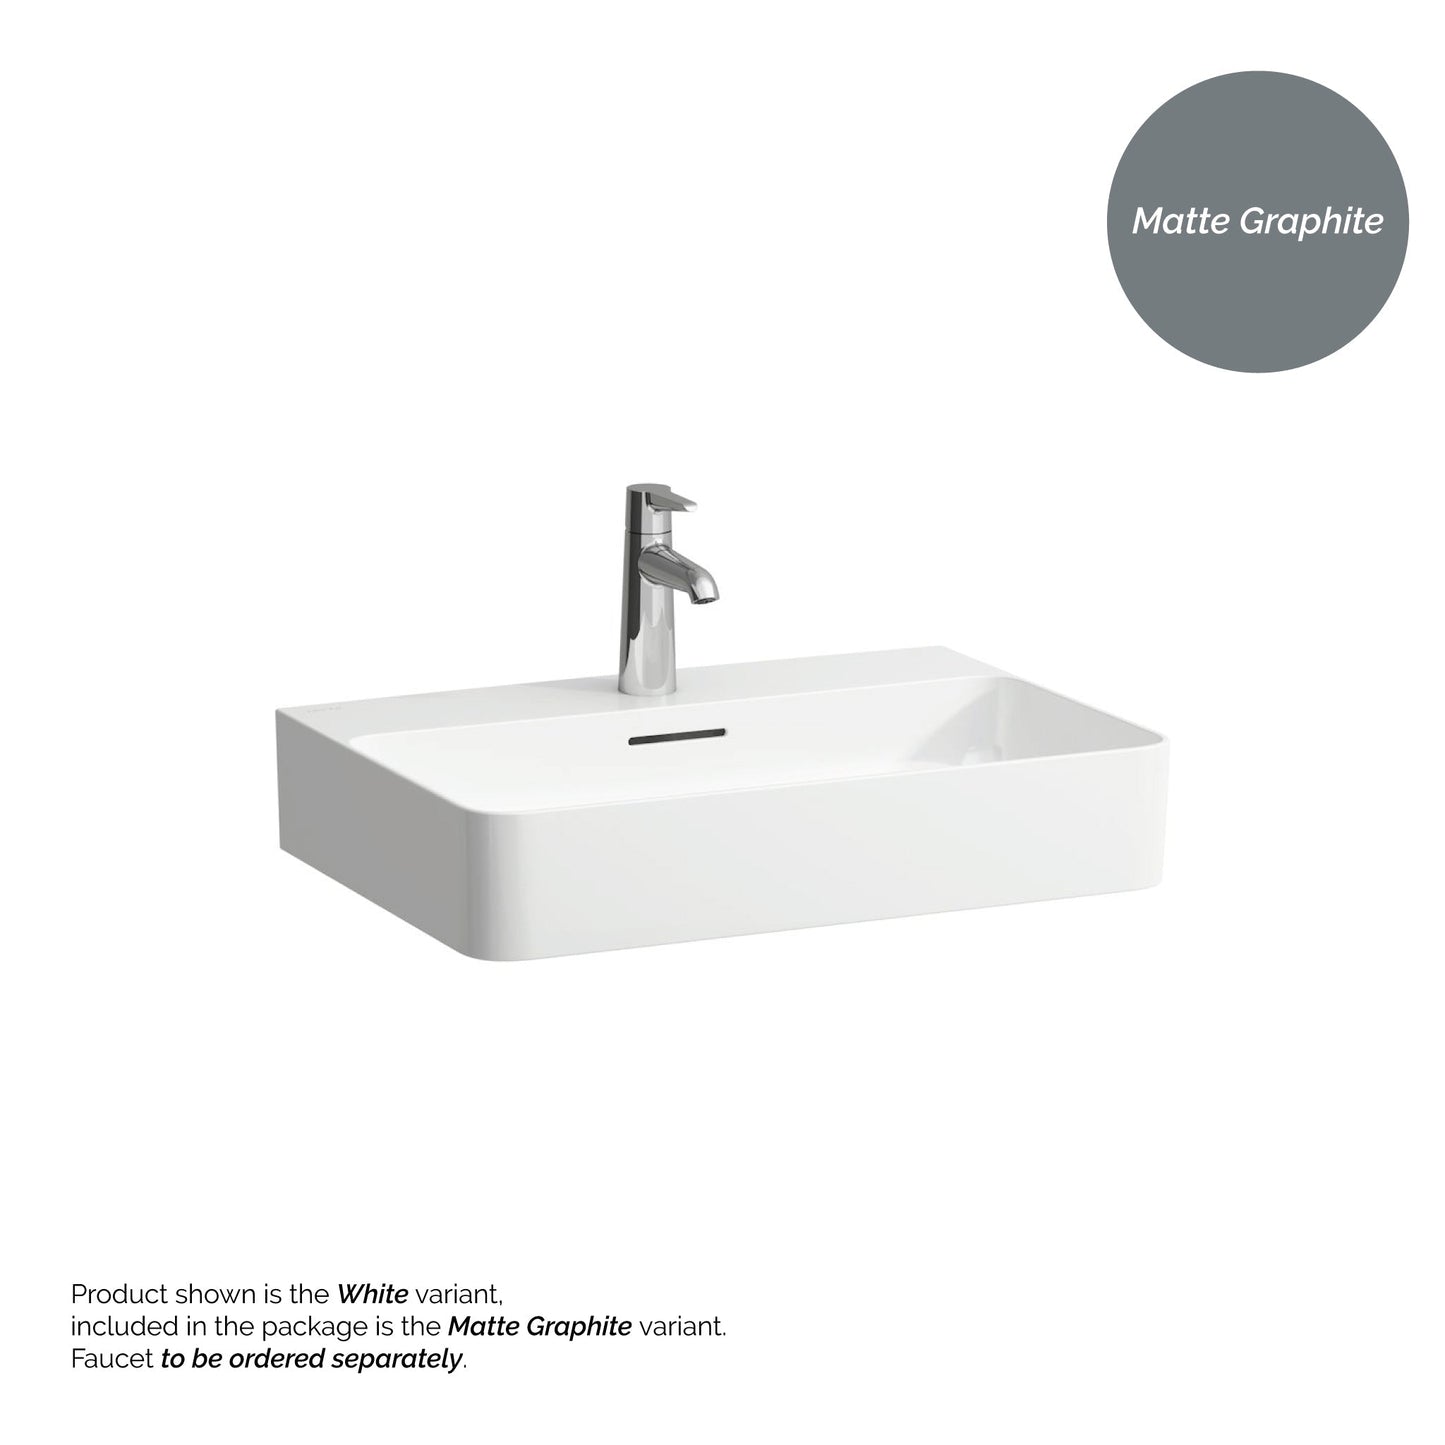 Laufen Val 24" x 17" Matte Graphite Ceramic Wall-Mounted Bathroom Sink With Faucet Hole